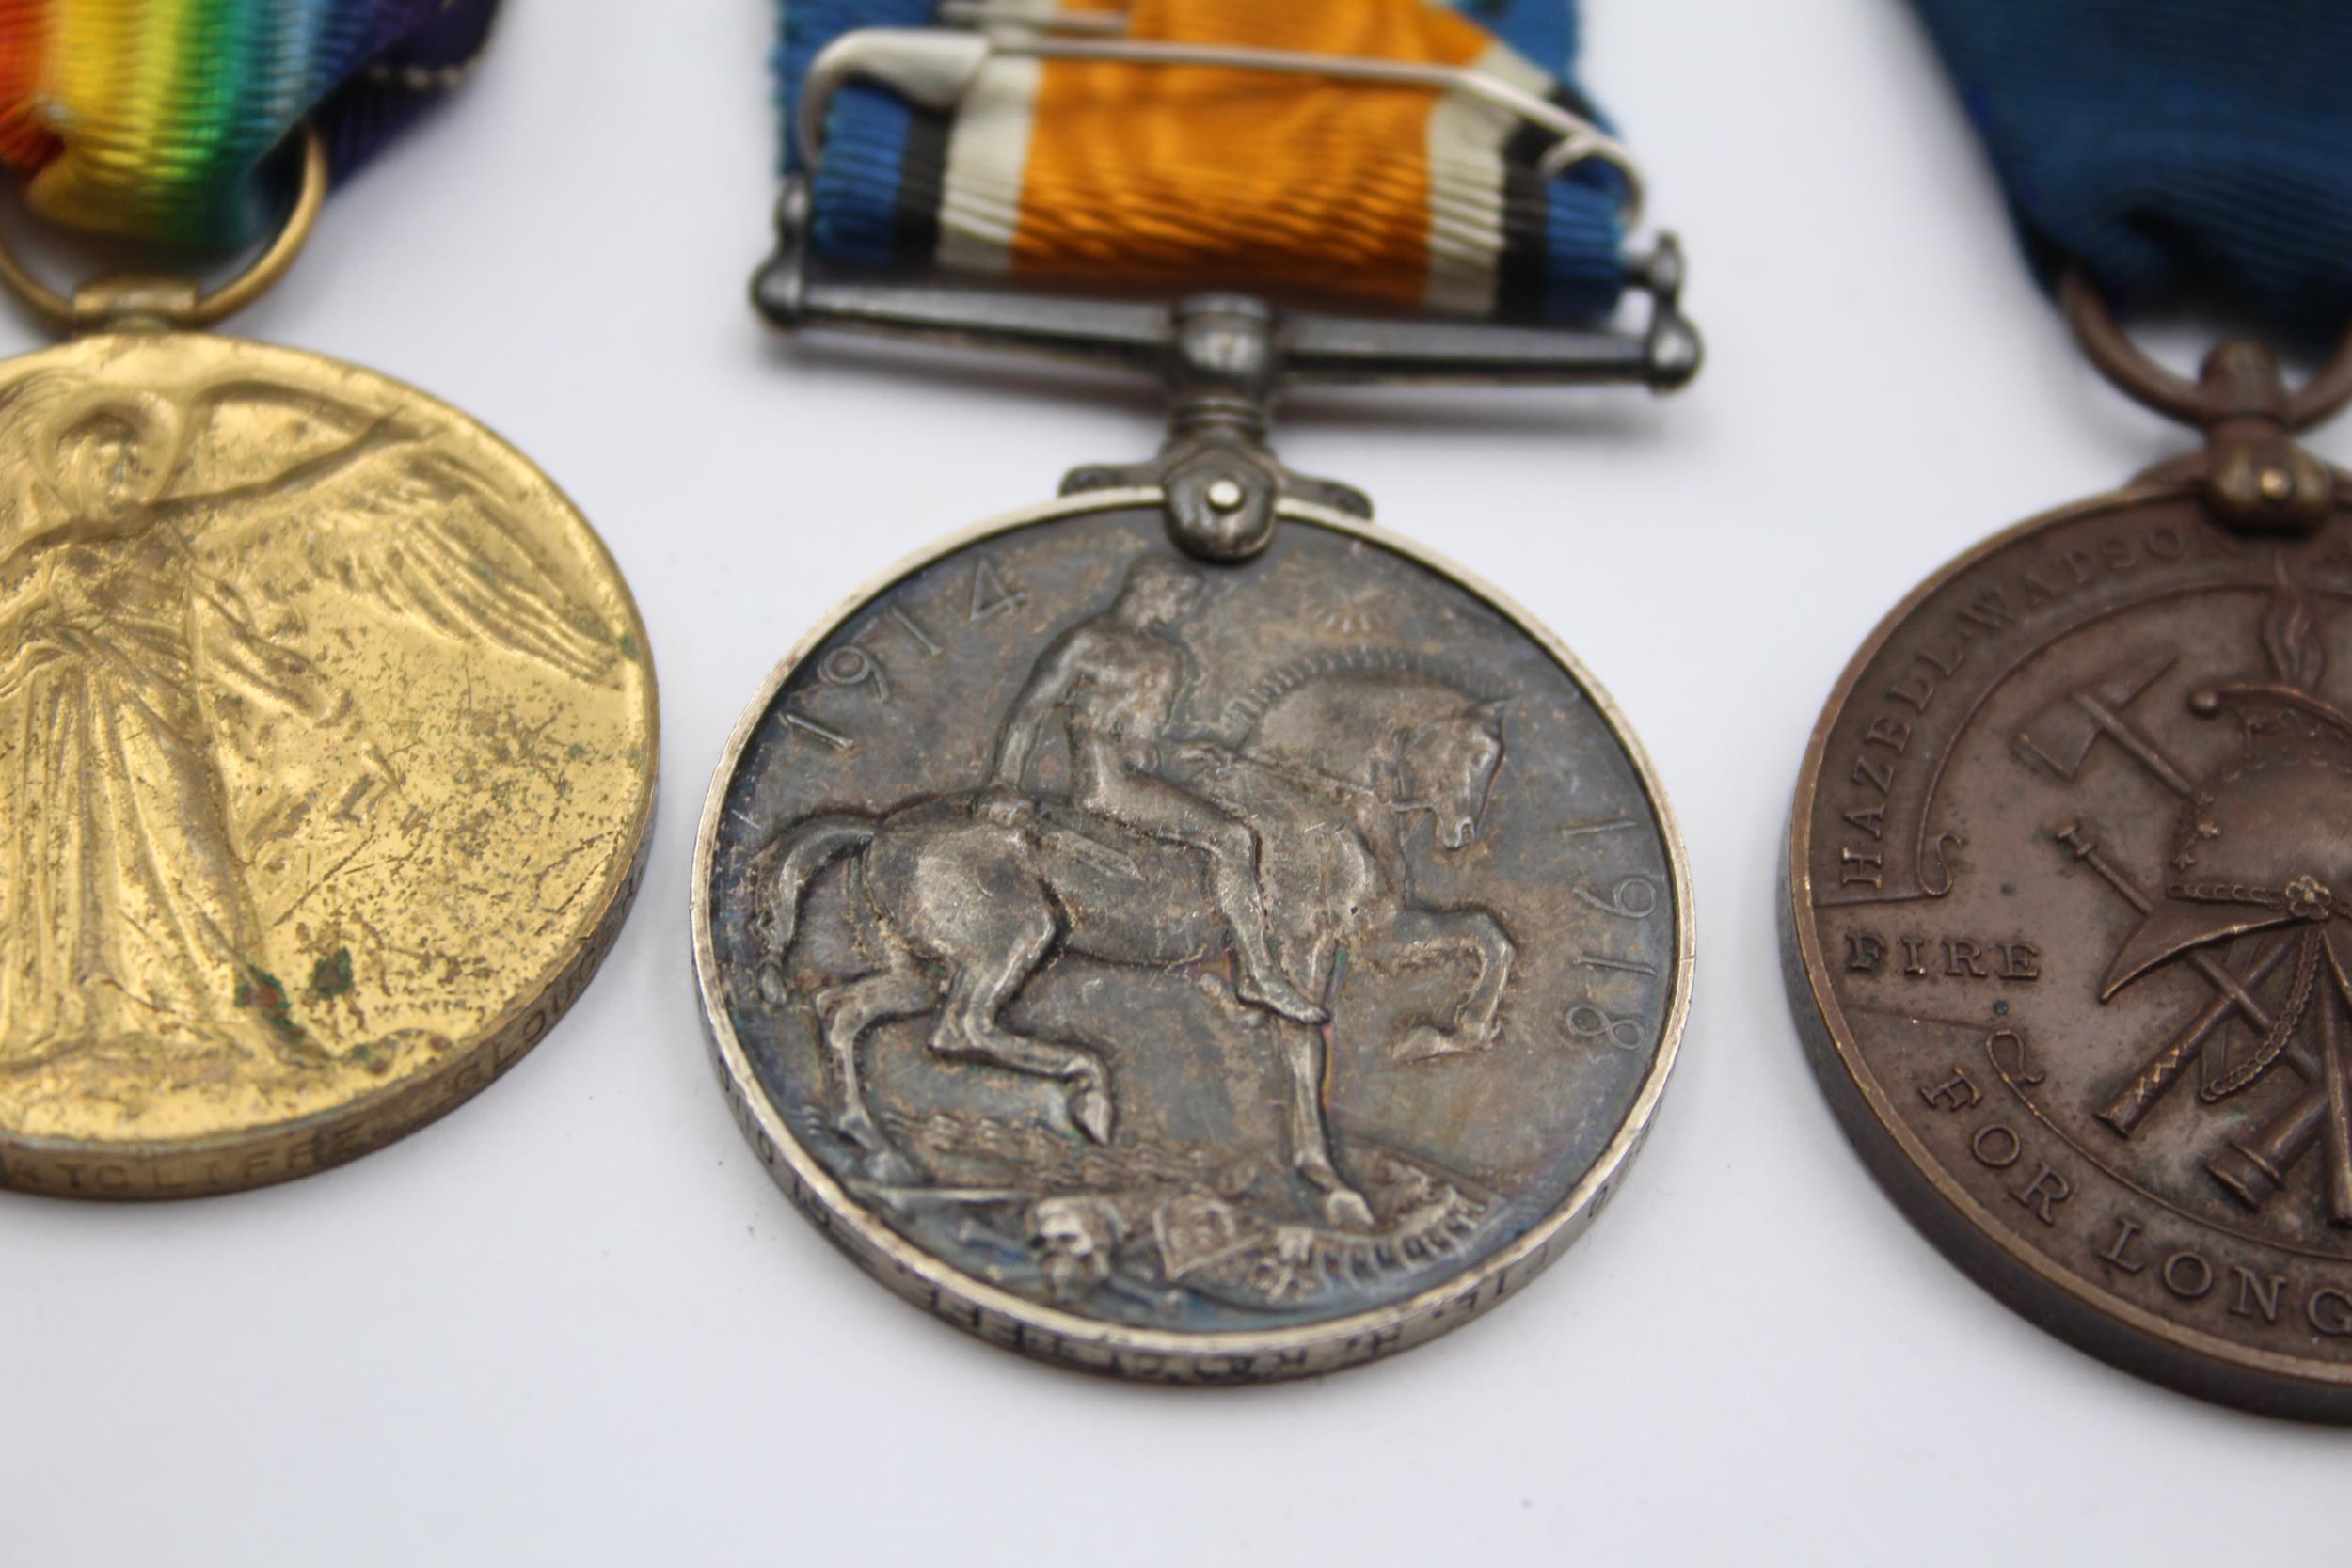 WW1 Firebrigade Medal Group Pair 34290 Pte Ratcliffe Gloster R, Fire 10yr // In antique condition - Image 3 of 5